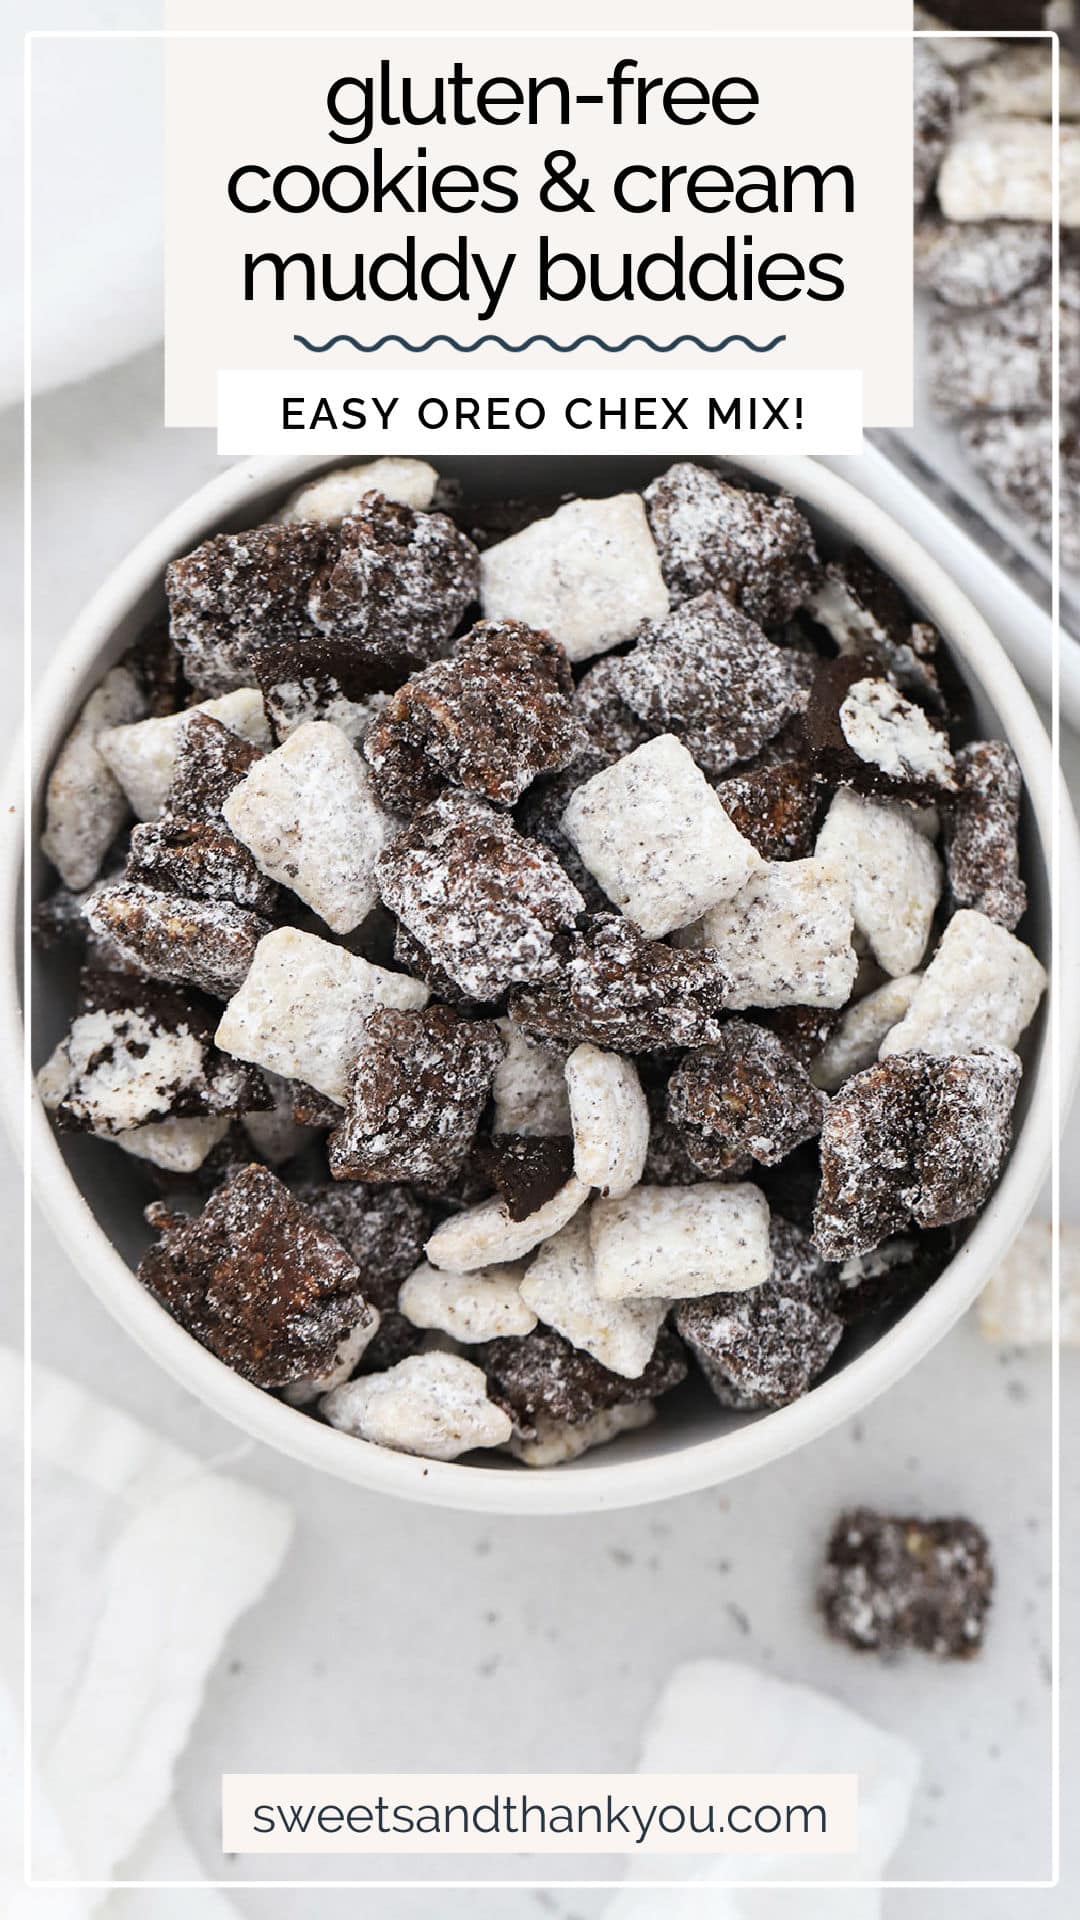 These cookies and cream oreo muddy buddies are such a fun spin on the classic! Plus, they’re as fun to make as they are to eat! / oreo chex mix / oreo puppy chow / cookies & cream chex mix / cookies & cream puppy chow / cookies & cream muddy buddies recipe / black and white chex mix / black and white puppy chow / black and white muddy buddies / gluten free muddy buddies recipe / gluten free oreo dessert / no bake dessert